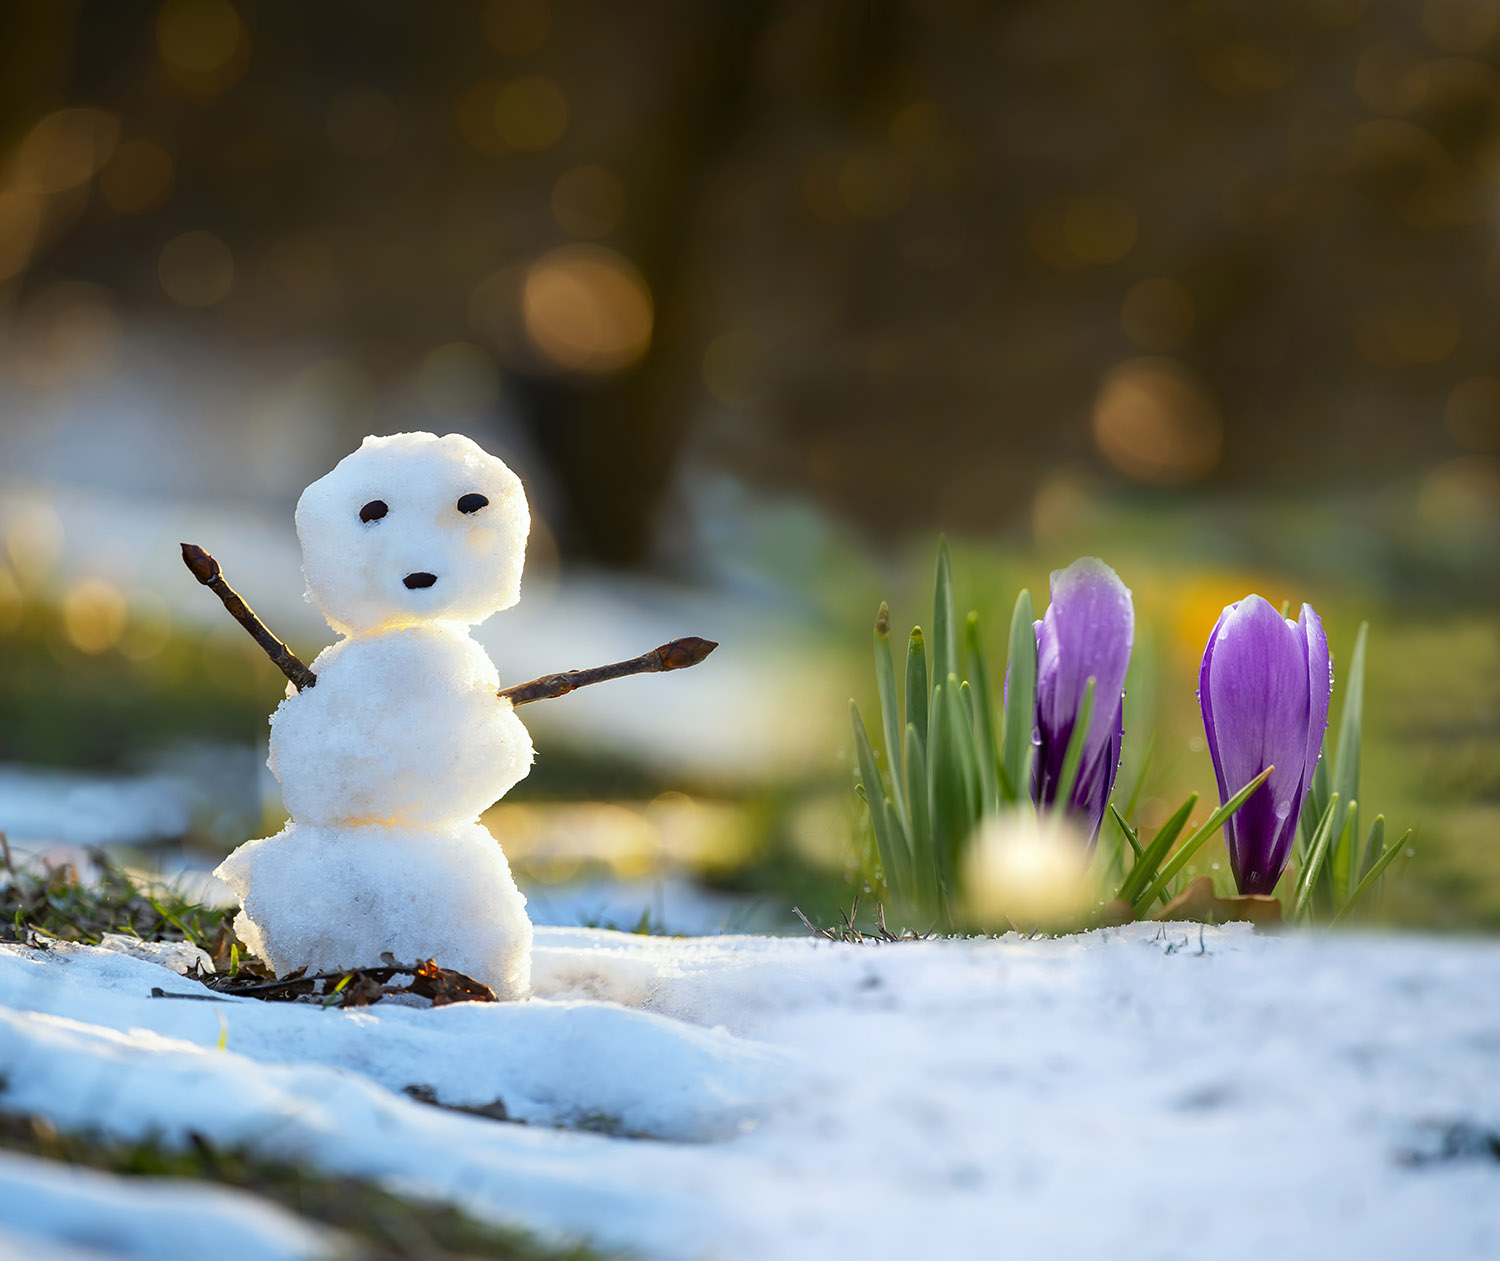 Stepping Stones Spring Snowman and Crocus